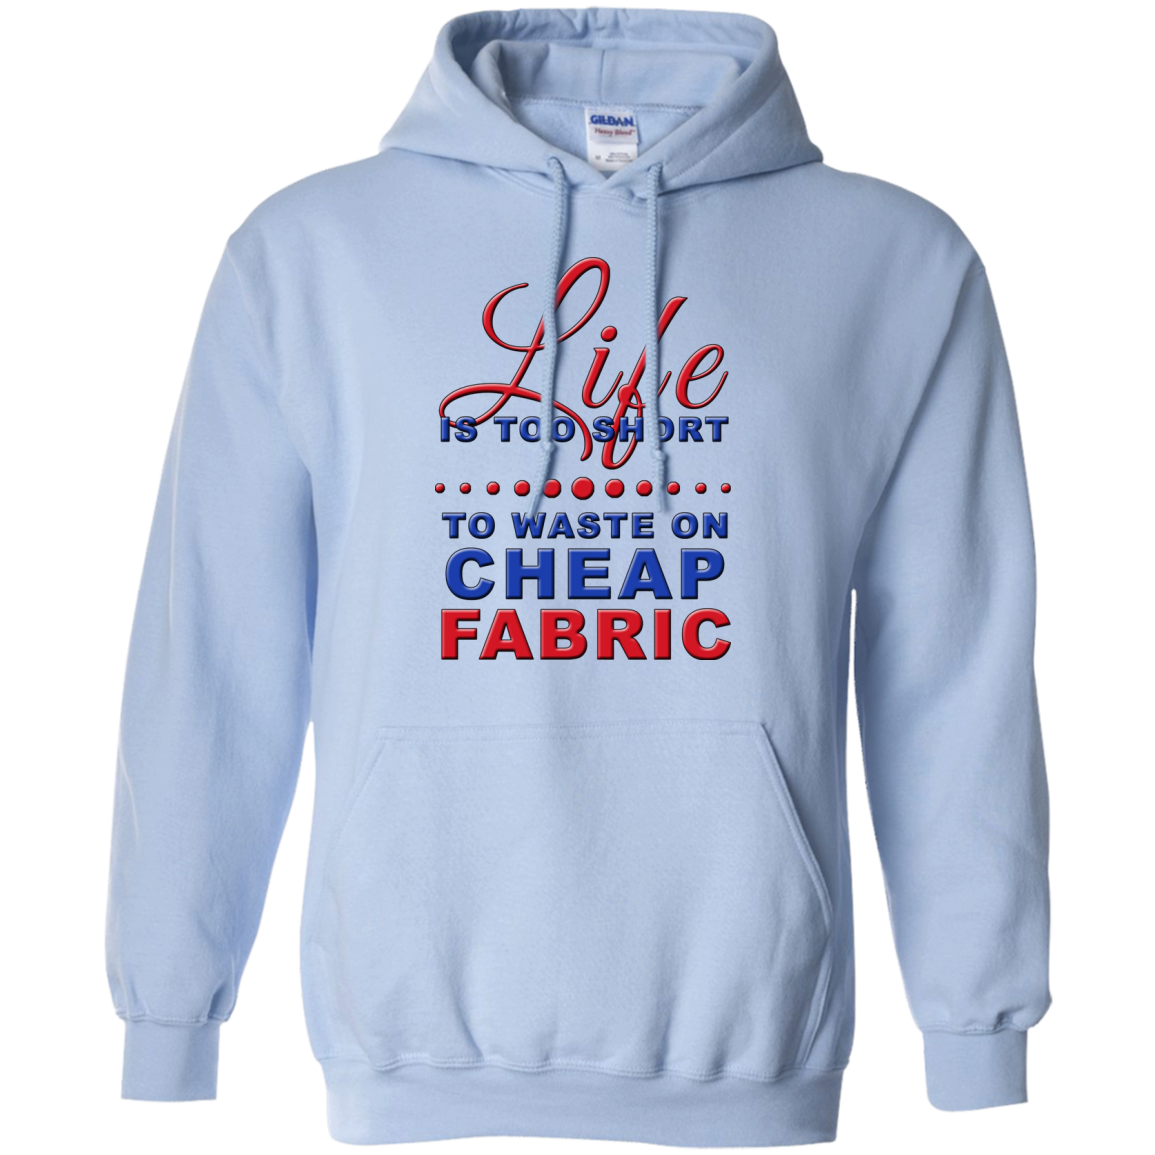 Life is Too Short to Use Cheap Fabric Pullover Hoodies - Crafter4Life - 6